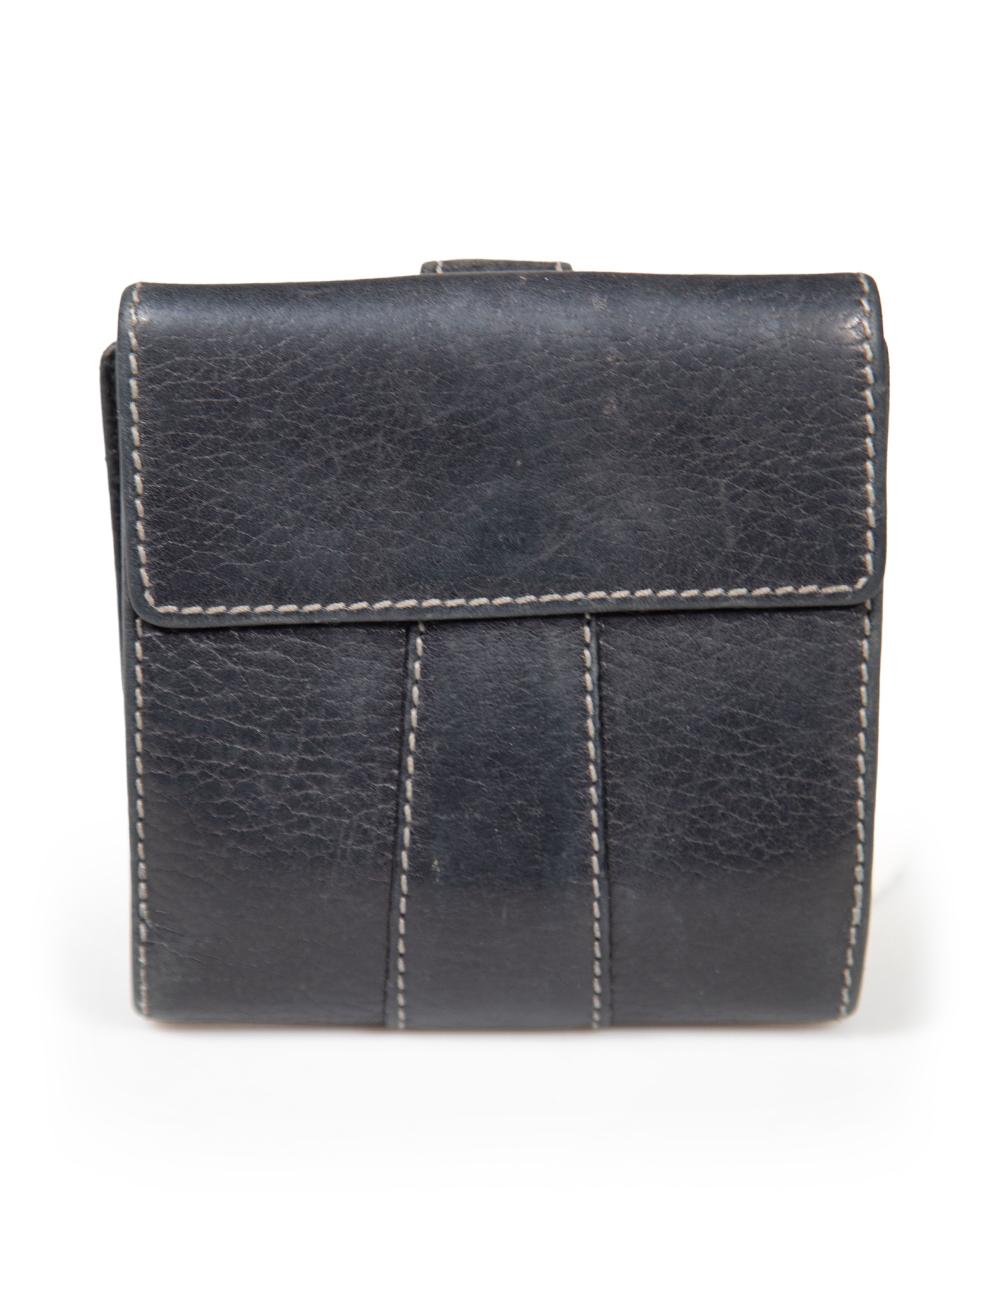 Loewe Navy Leather Buckle Detail Bifold Wallet In Good Condition For Sale In London, GB